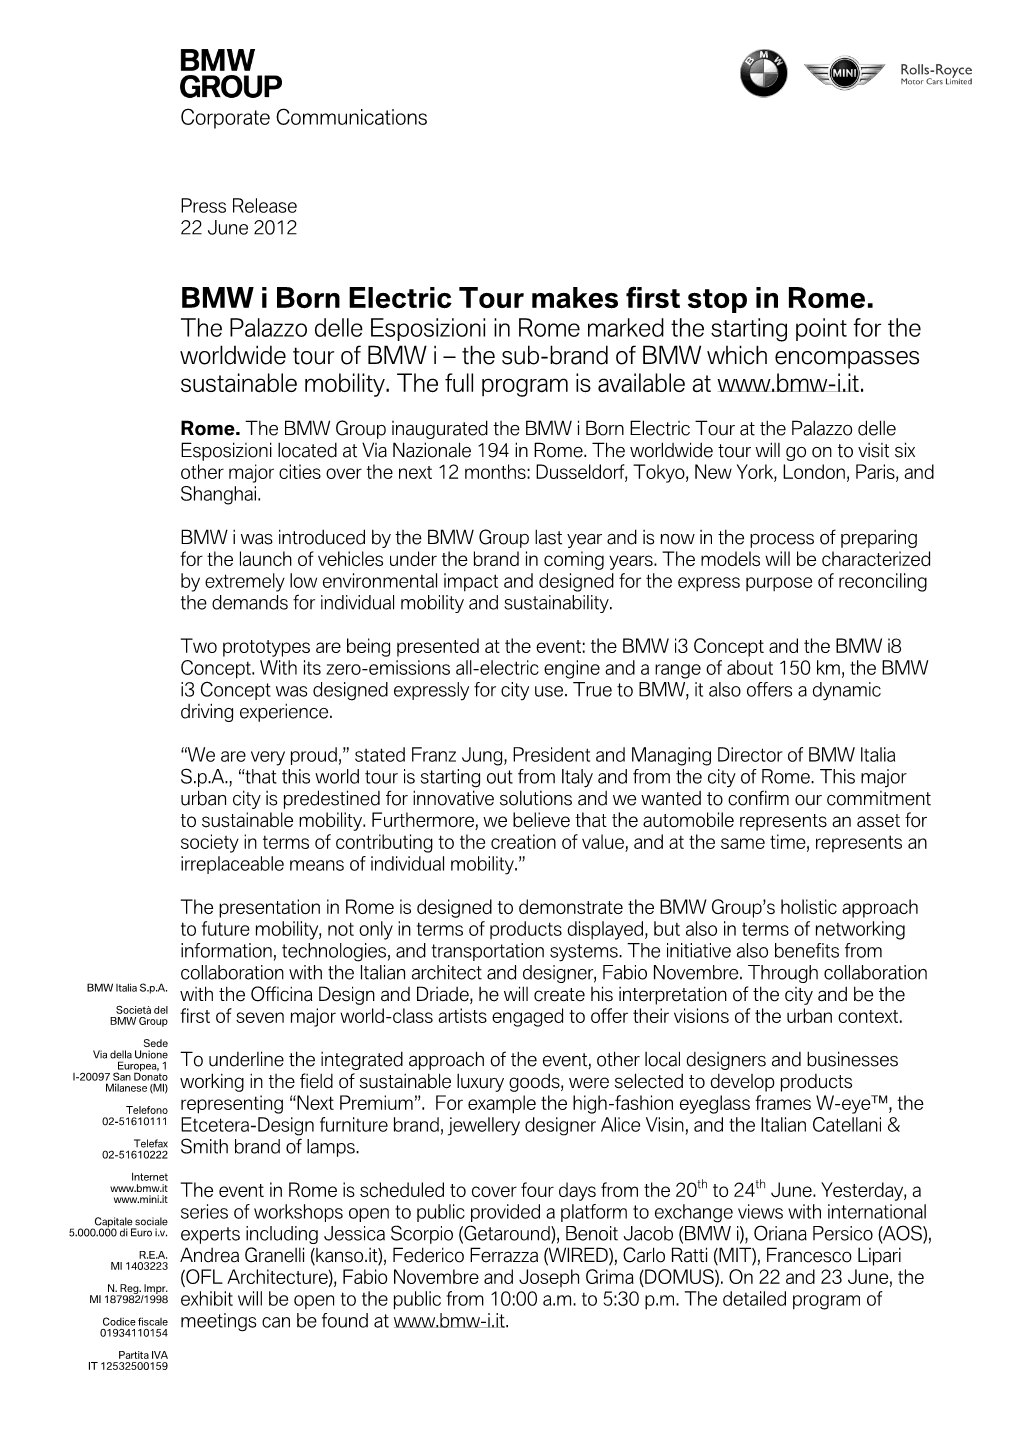 BMW I Born Electric Tour Makes First Stop in Rome